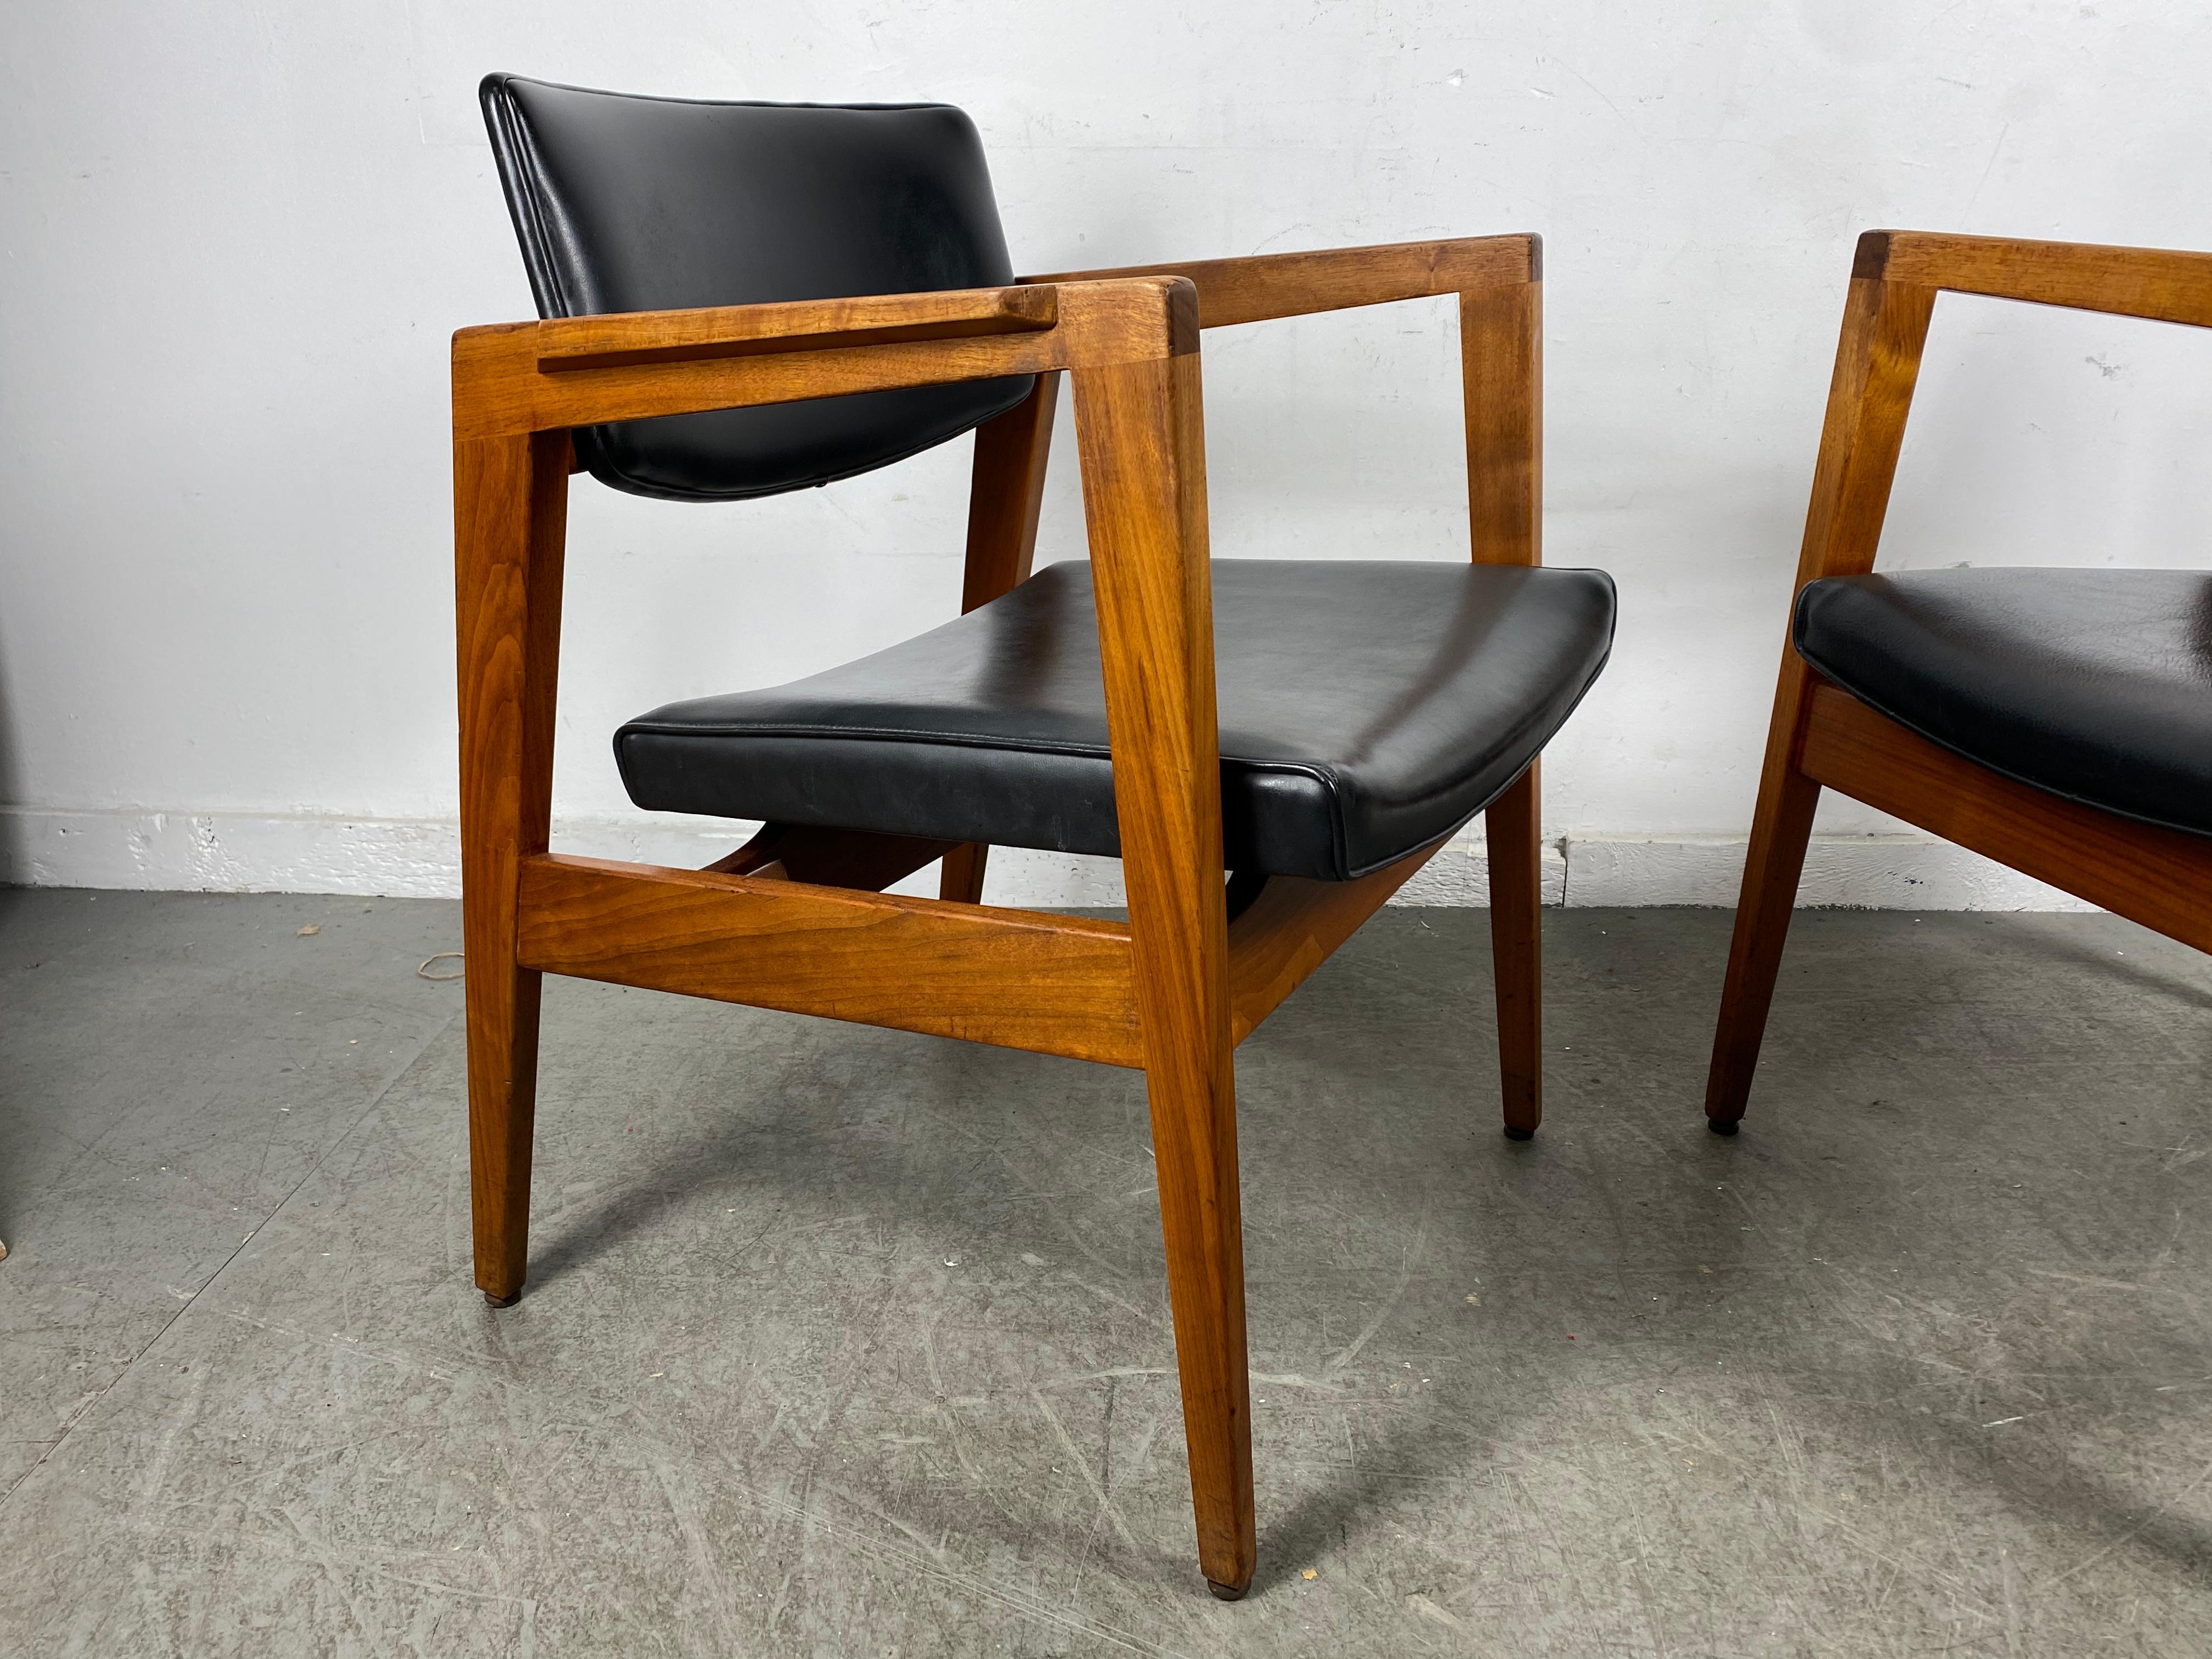 Matched Pair Classic Mid-Century Modern Lounge Chairs in solid walnut and leather manufactured by W.H.Gunlock Company. designed in the manner of Jens Risom. superior quality and construction, extremely comfortable, All original, wonderful patina.